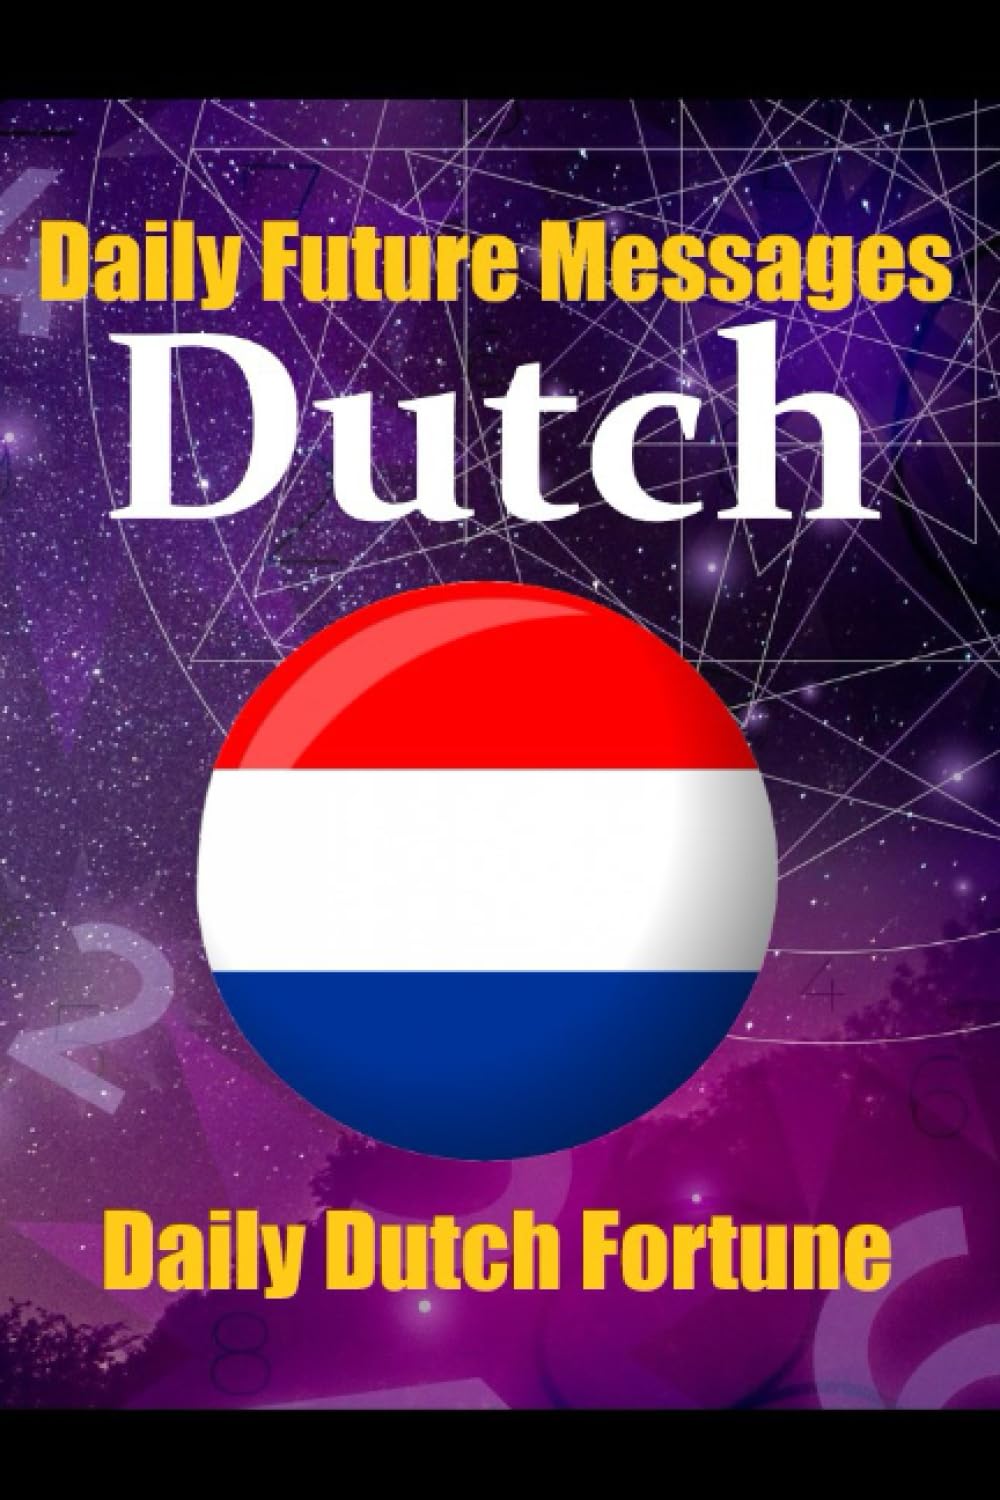 Fortune in Dutch Words | Learn the Dutch Language through Daily Random Future Messages